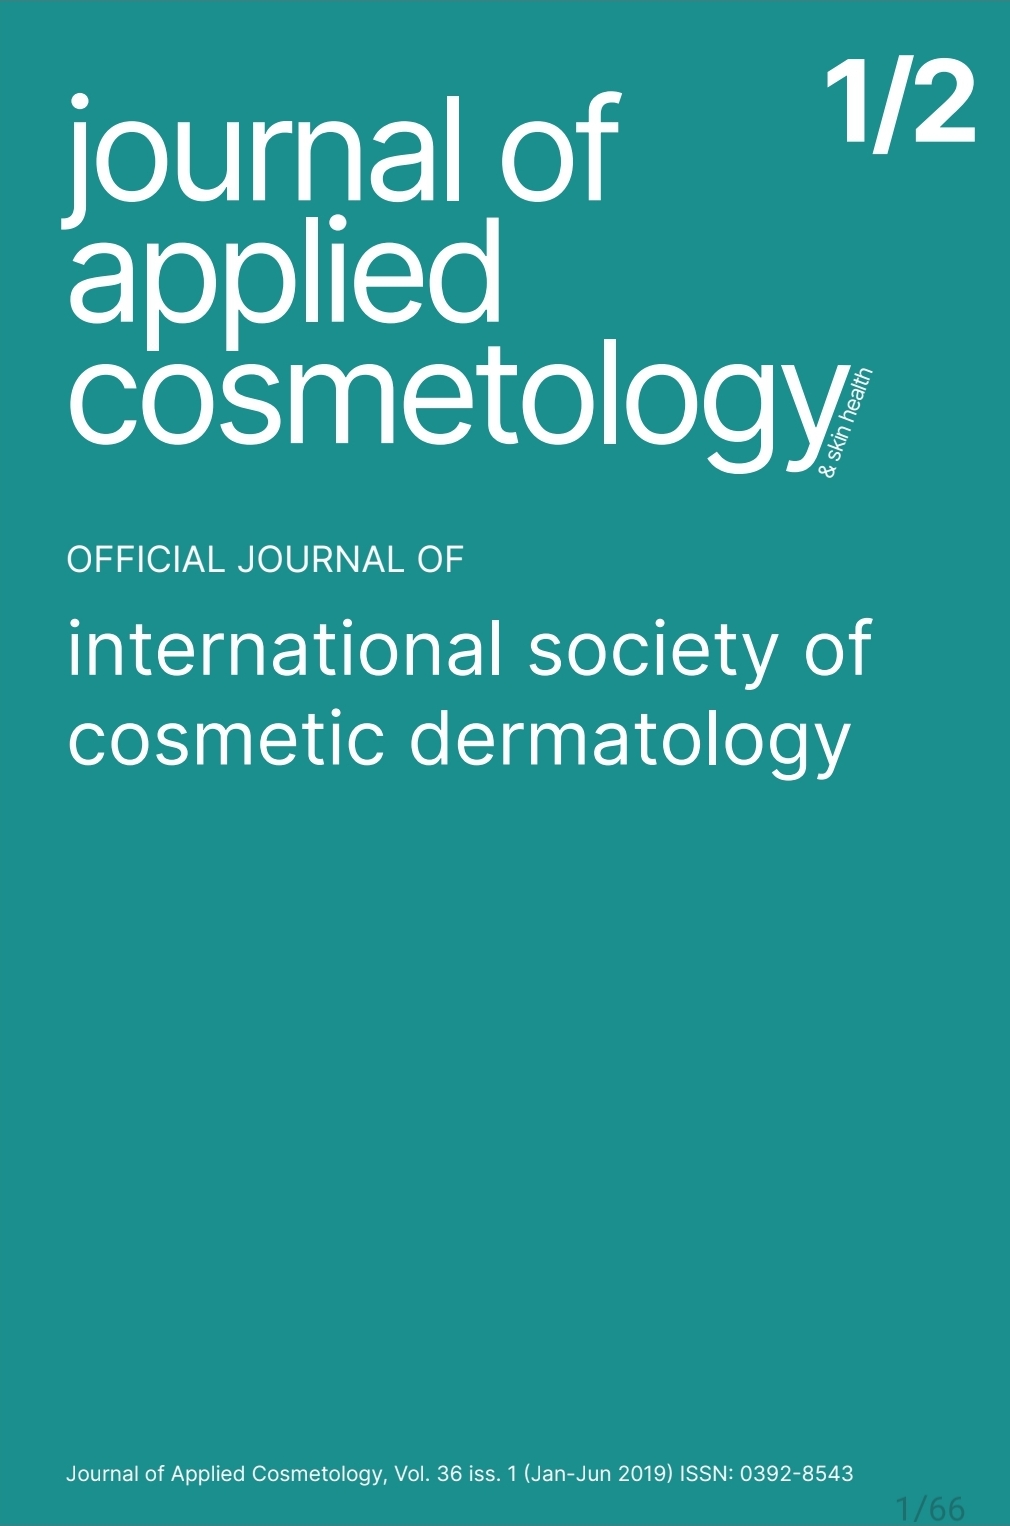 					View Vol. 37 No. 1 (2019): Journal of Applied Cosmetology
				